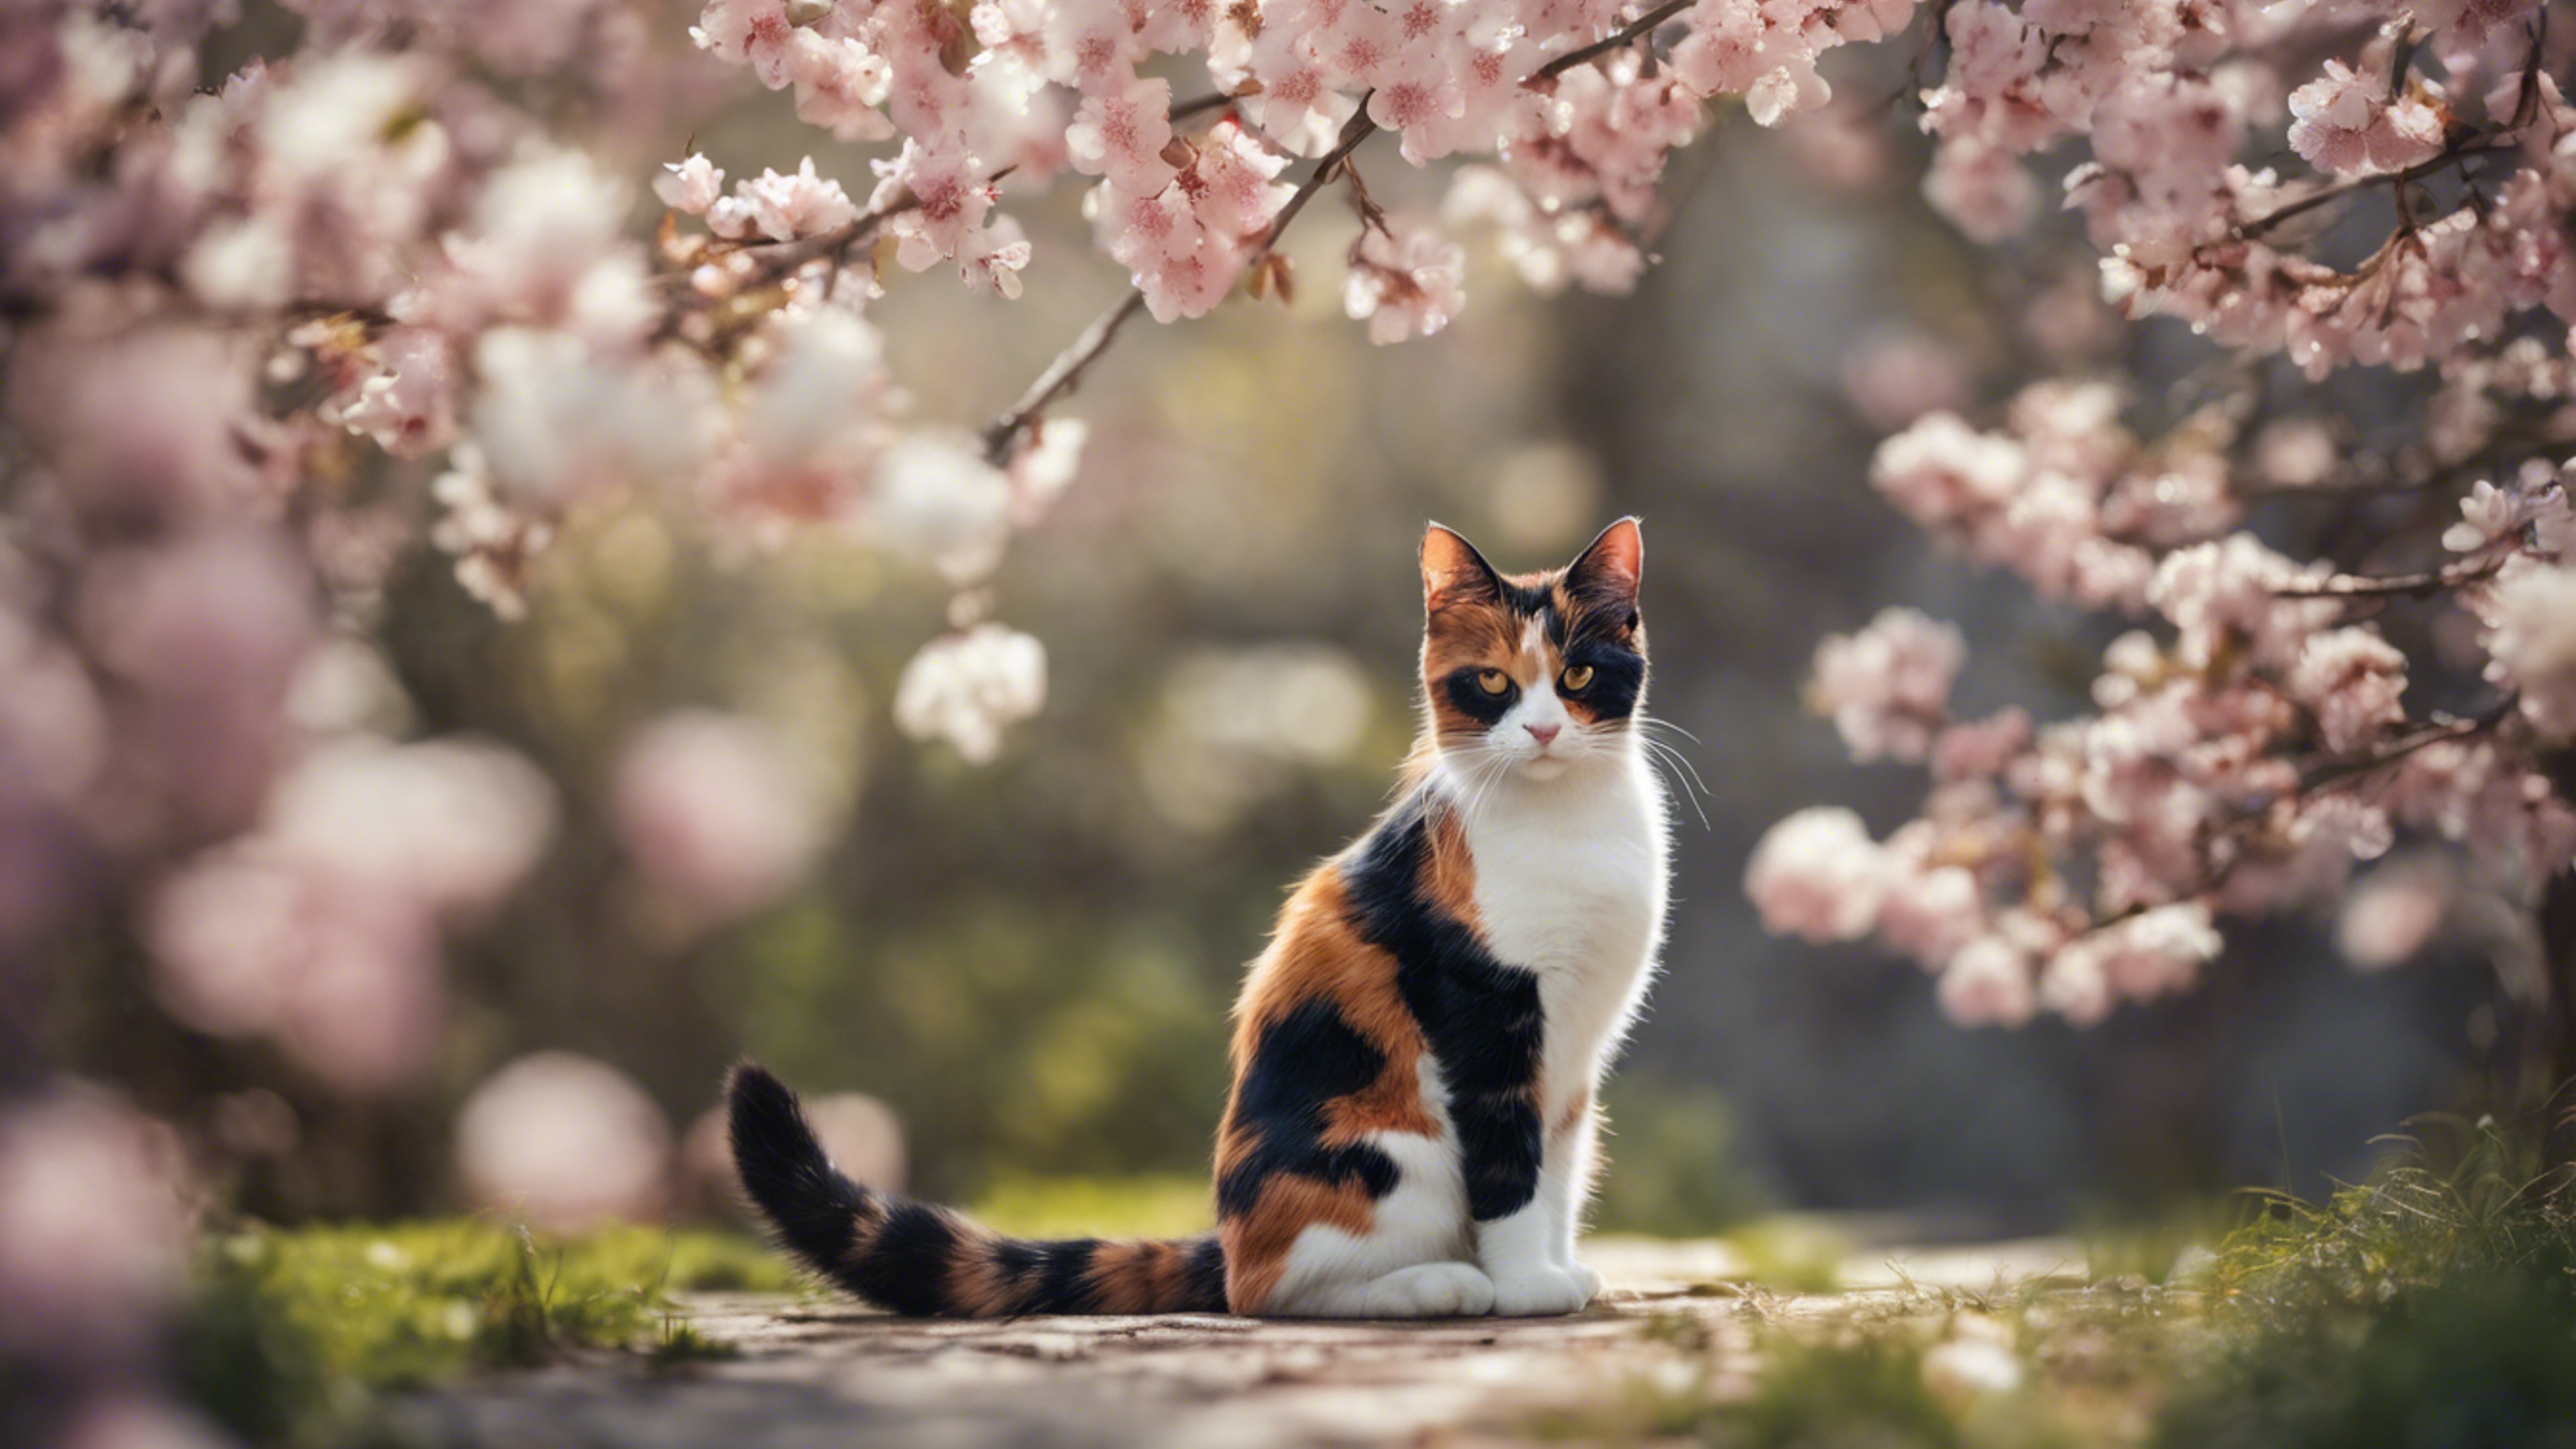 A scene of a secret conversation between spring blossoms and a curious calico cat. Tapet[25a93ed29c5f43b5b851]